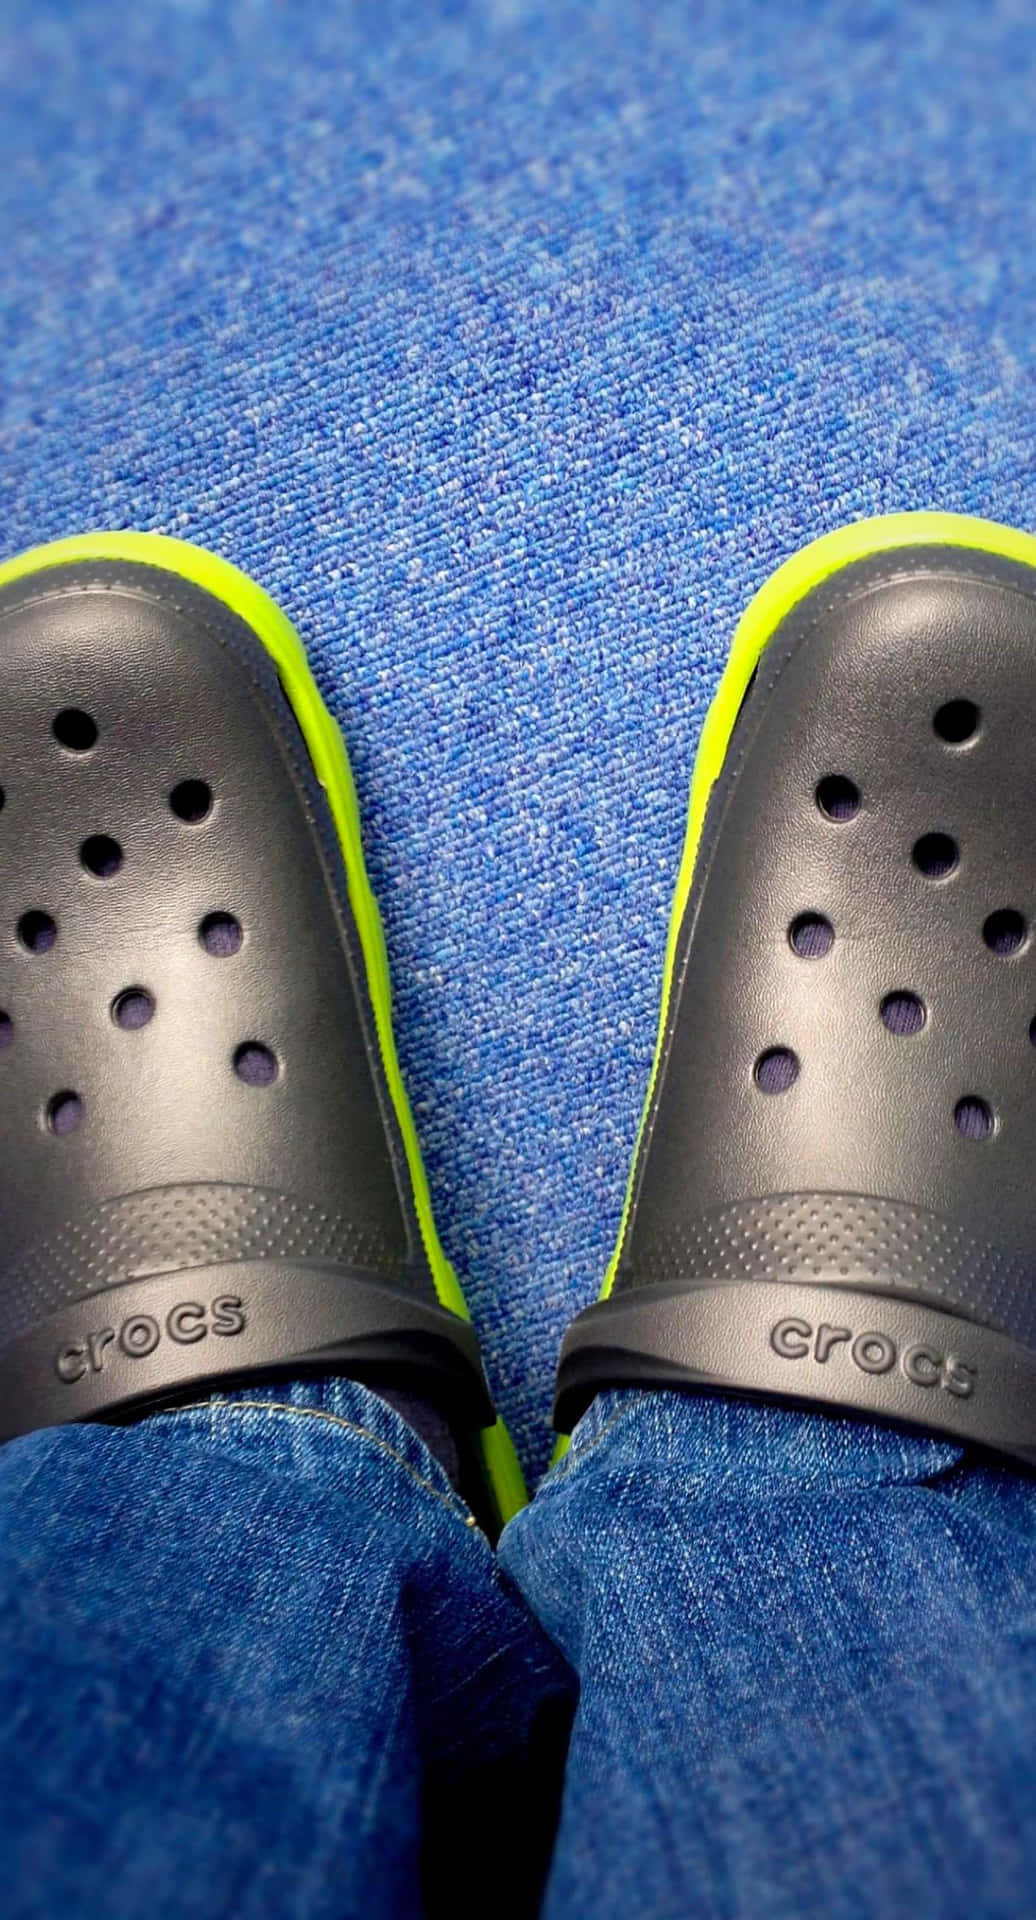 "Kick back and relax in a pair of Crocs this summer"